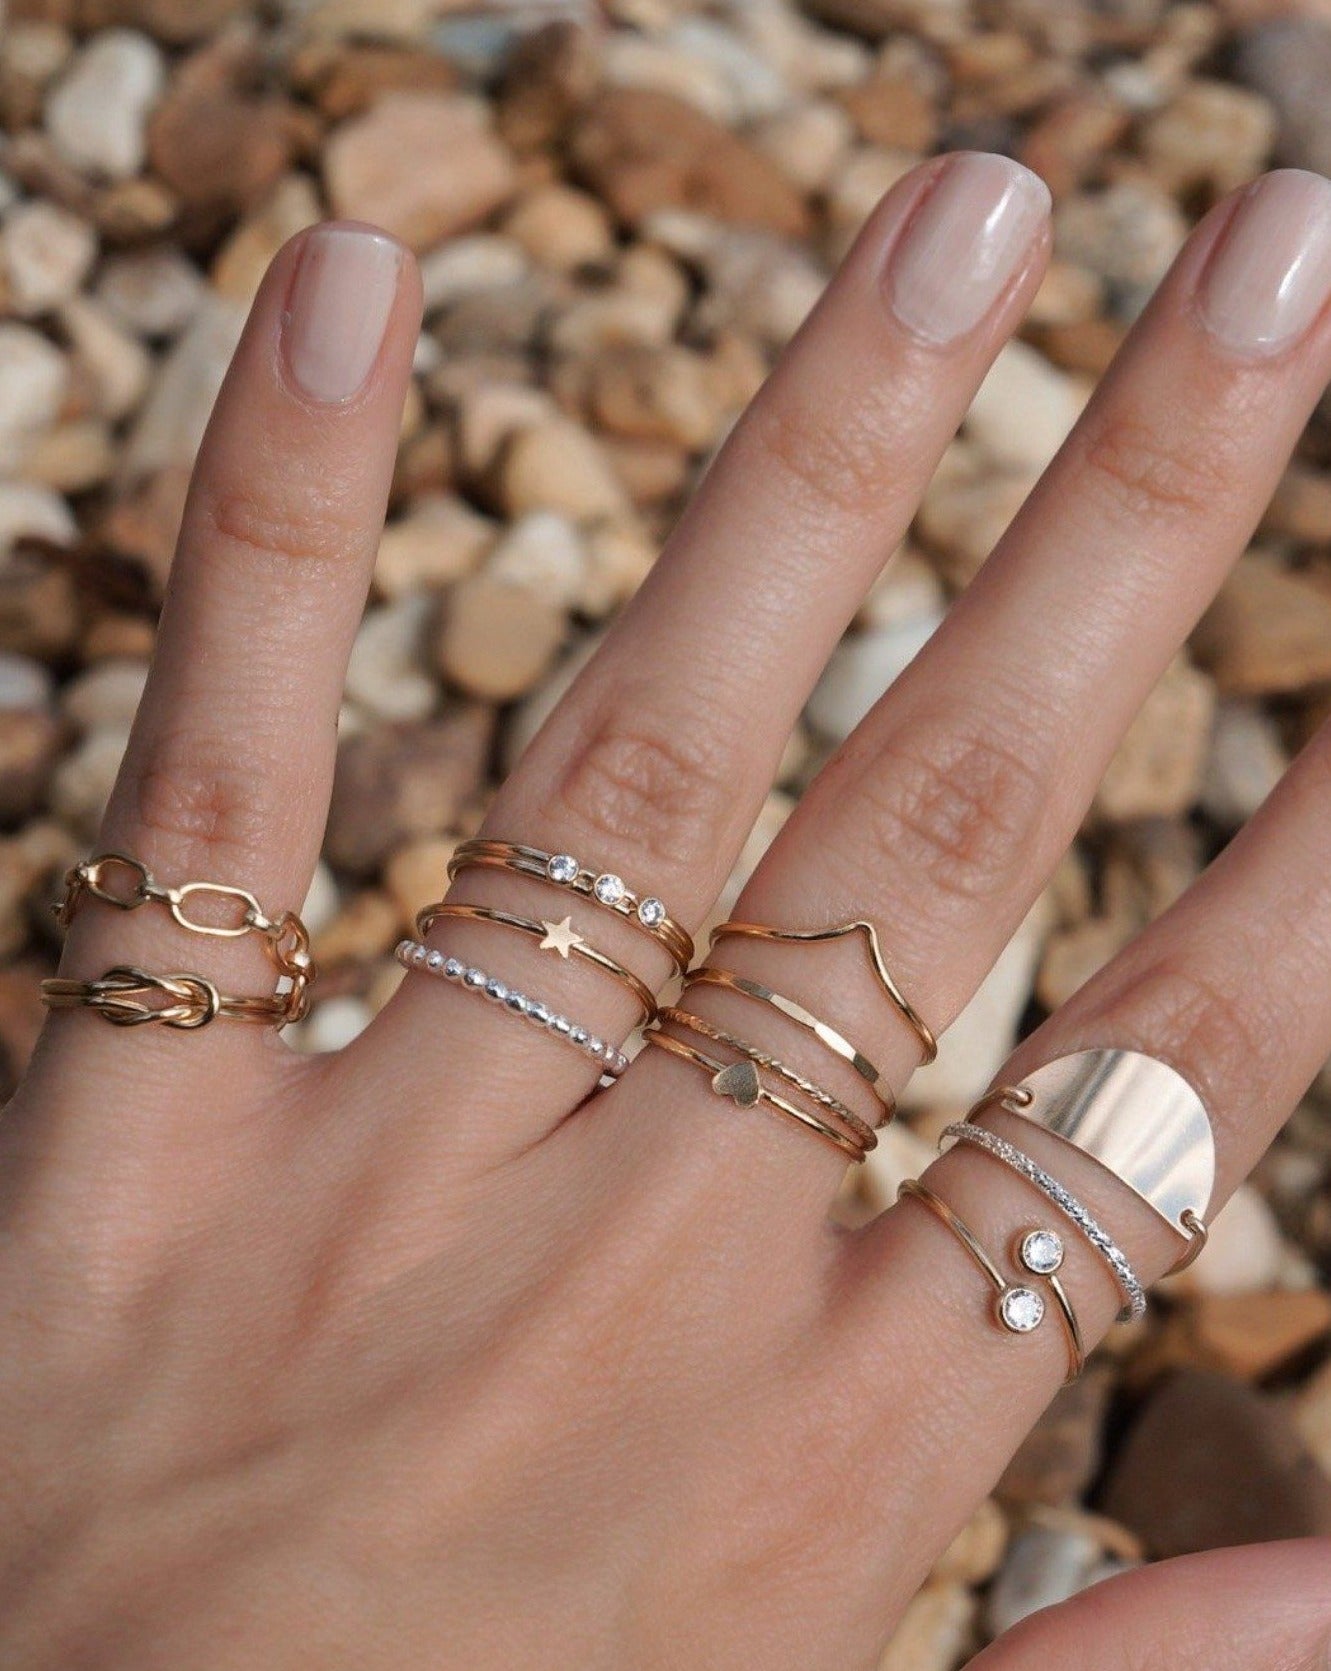 Chevron Rings by KOZAKH. A 1mm thick ring crafted in 14K Gold Filled, featuring a V shape design.